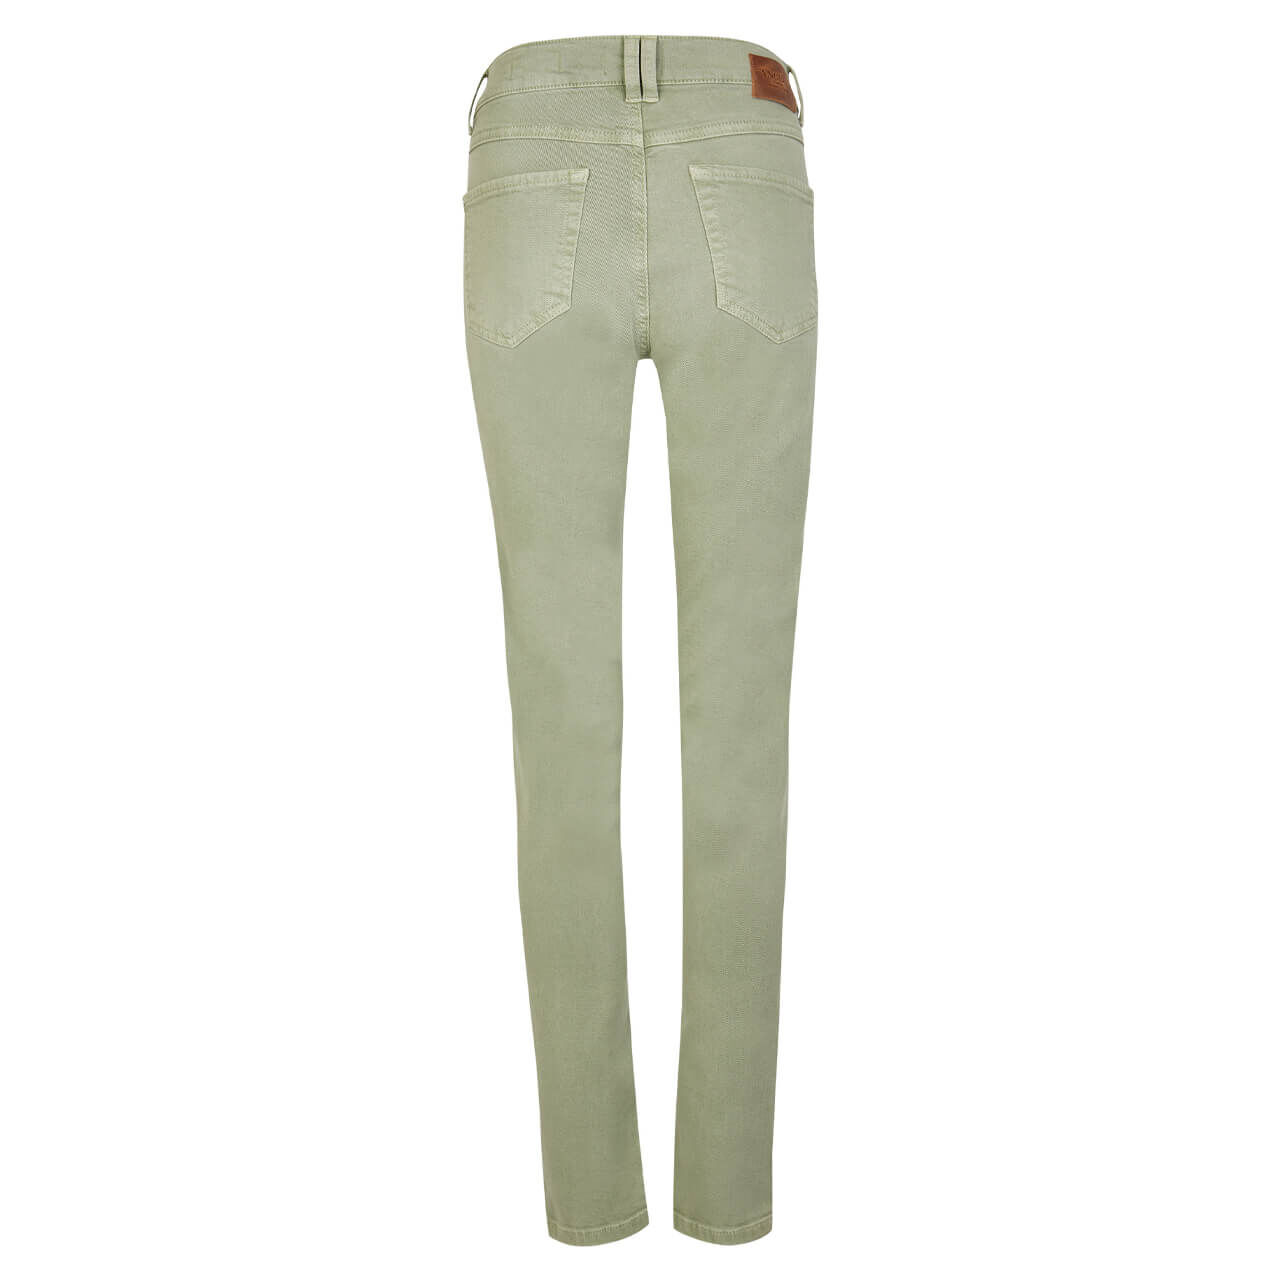 Angels Skinny Button Jeans eucalyptus used